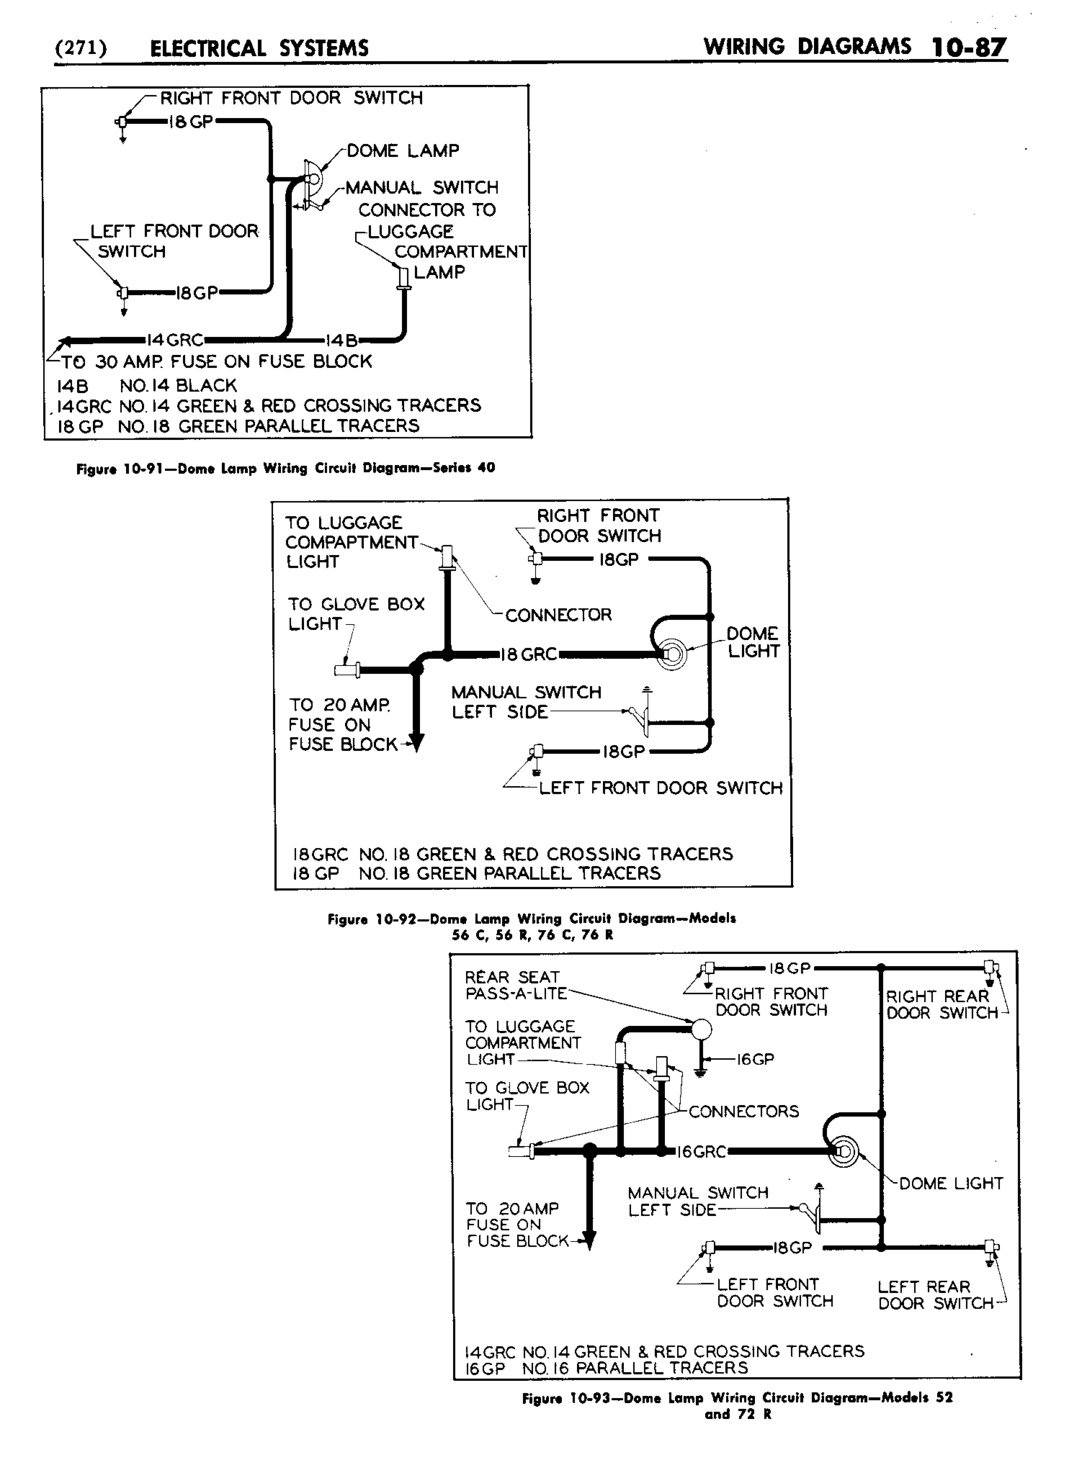 n_11 1953 Buick Shop Manual - Electrical Systems-088-088.jpg